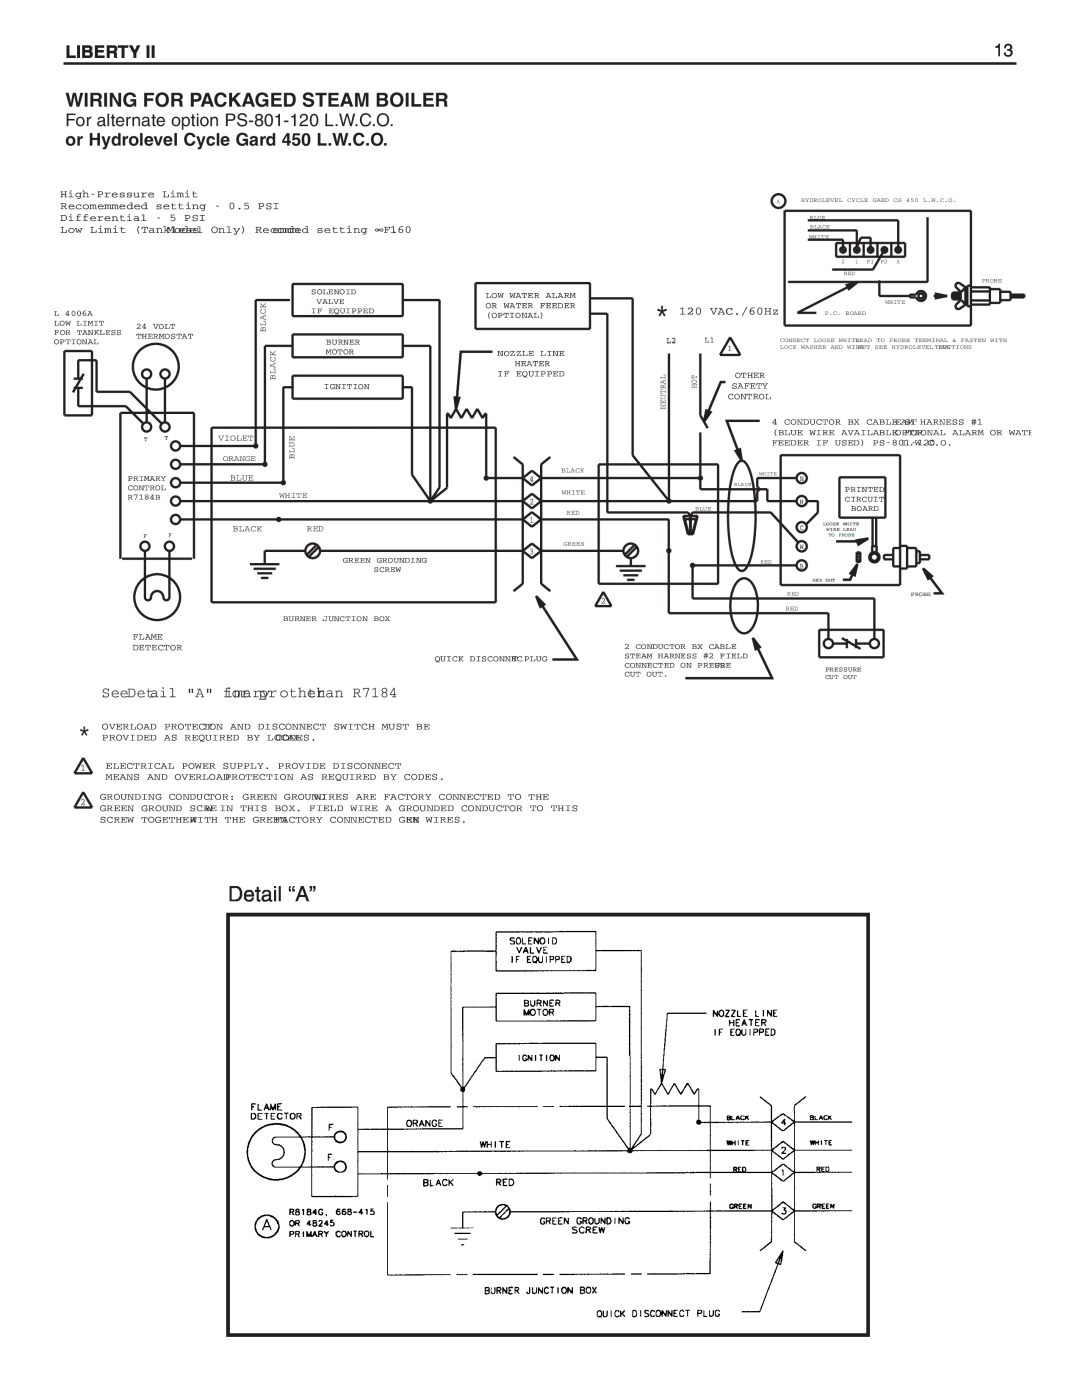 Slant/Fin BOILERS Wiring For Packaged Steam Boiler, or Hydrolevel Cycle Gard 450 L.W.C.O, Detail “A”, Liberty, hantr R7184 